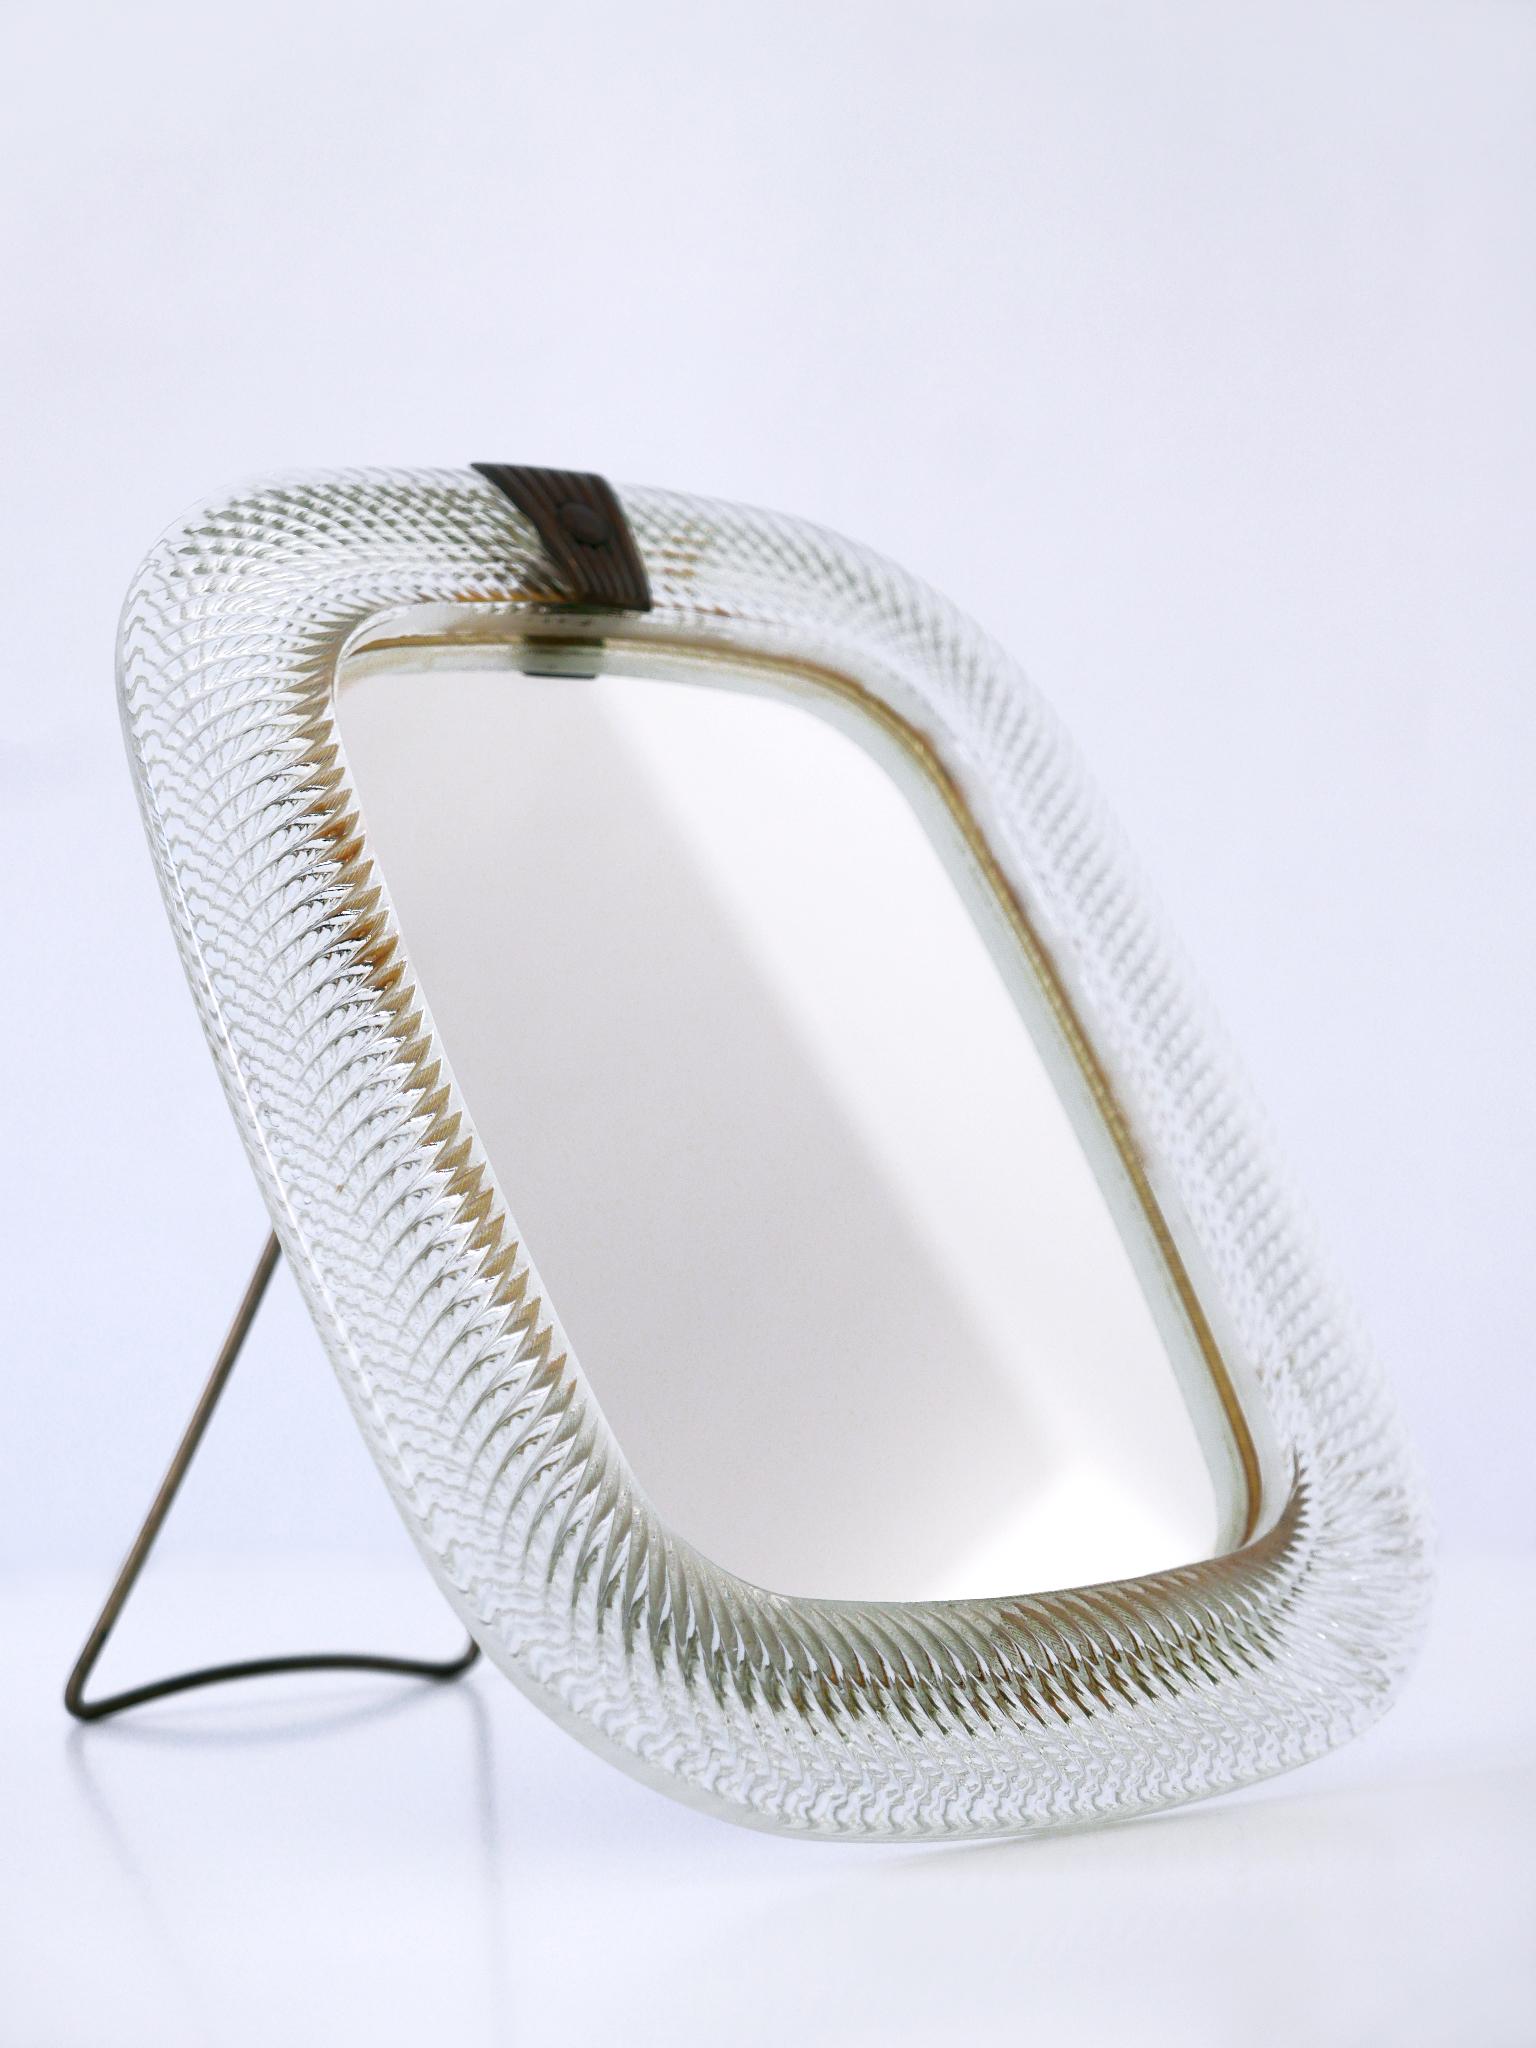 Italian Elegant Mid-Century Modern Wall or Vanity Mirror by Barovier & Toso Italy, 1950s For Sale